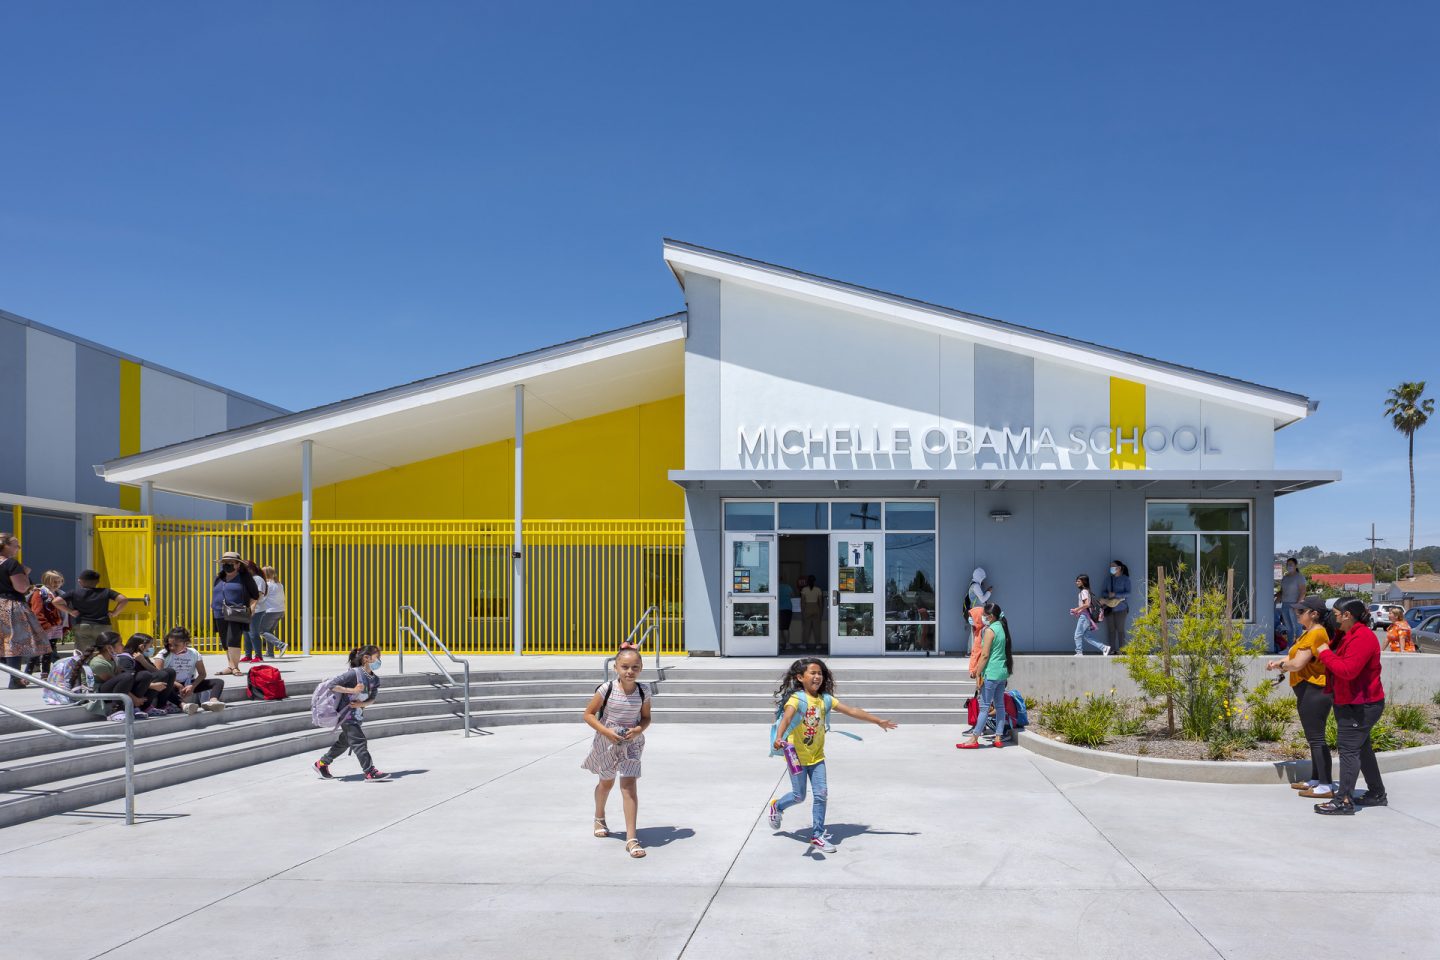 Image of the front entry of Michelle Obama School with elementary students and parents/guardians